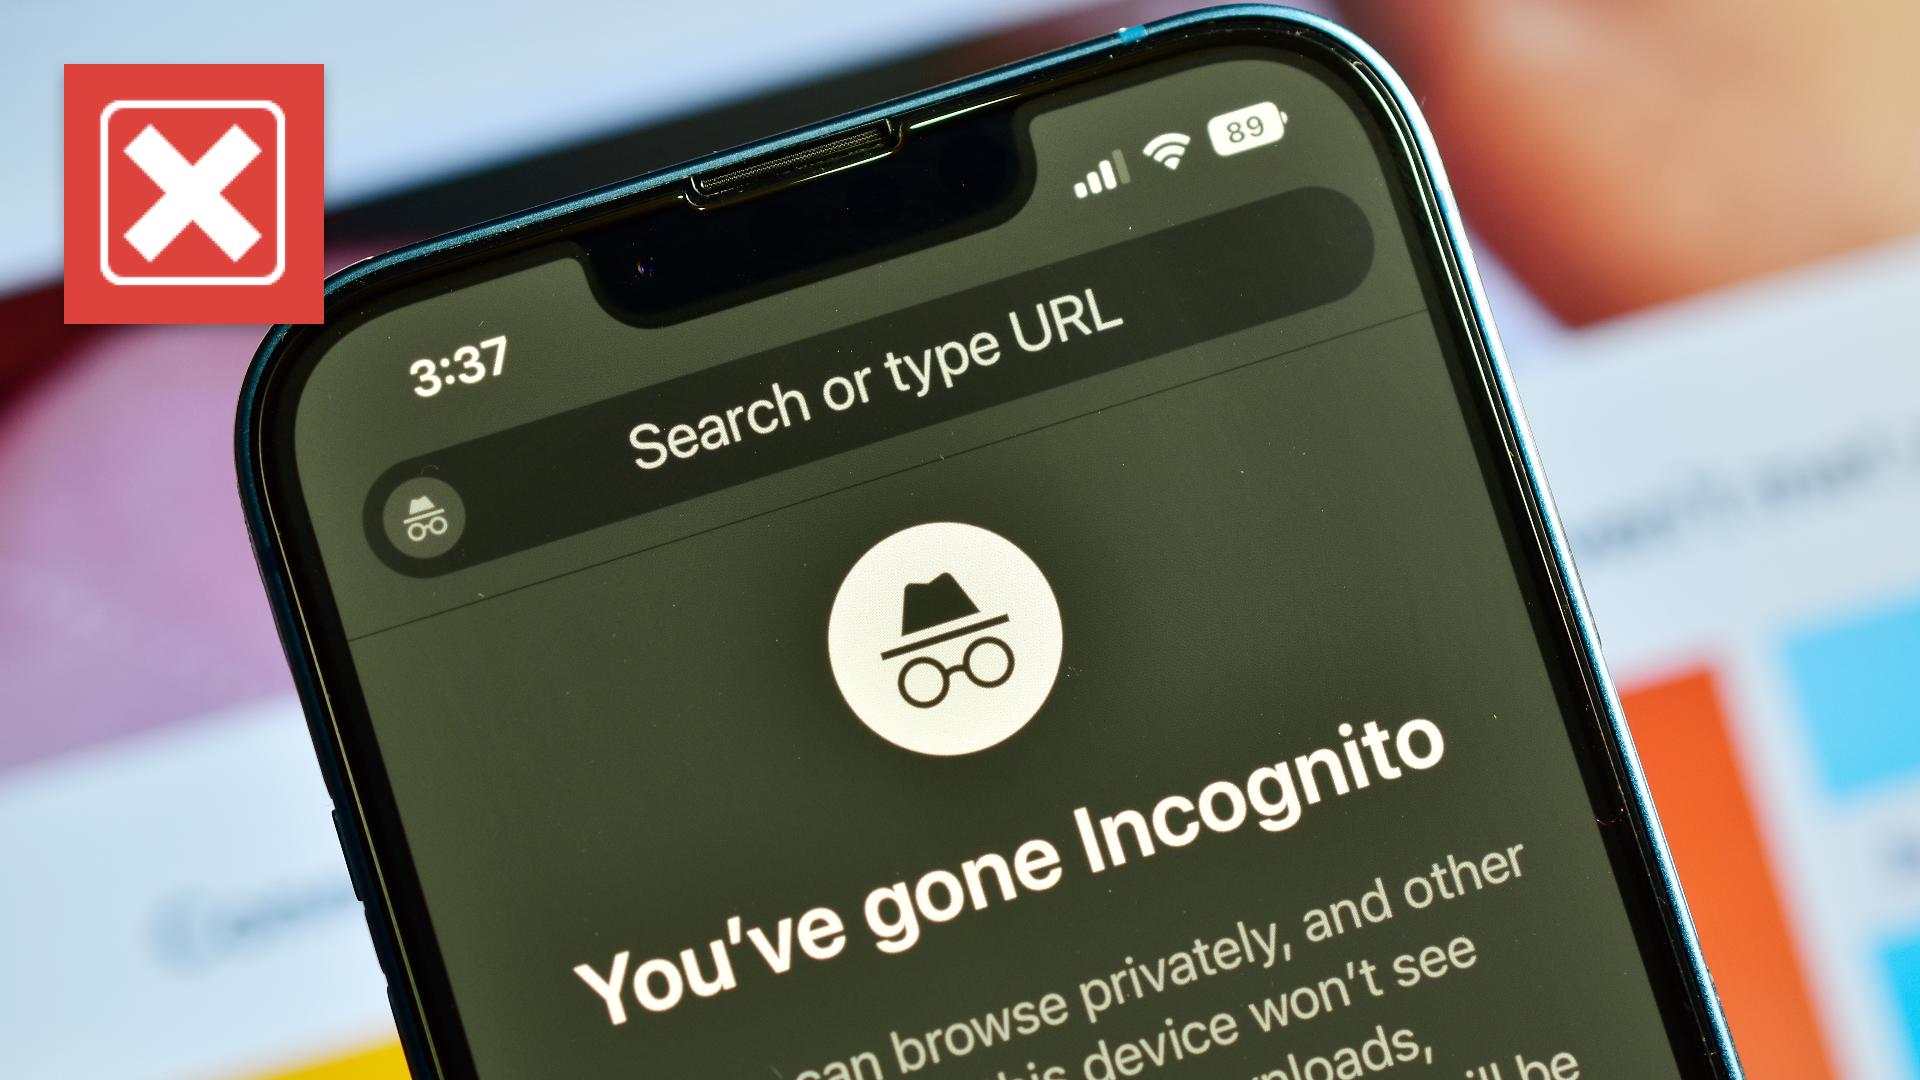 Google users won’t be paid in incognito mode lawsuit settlement